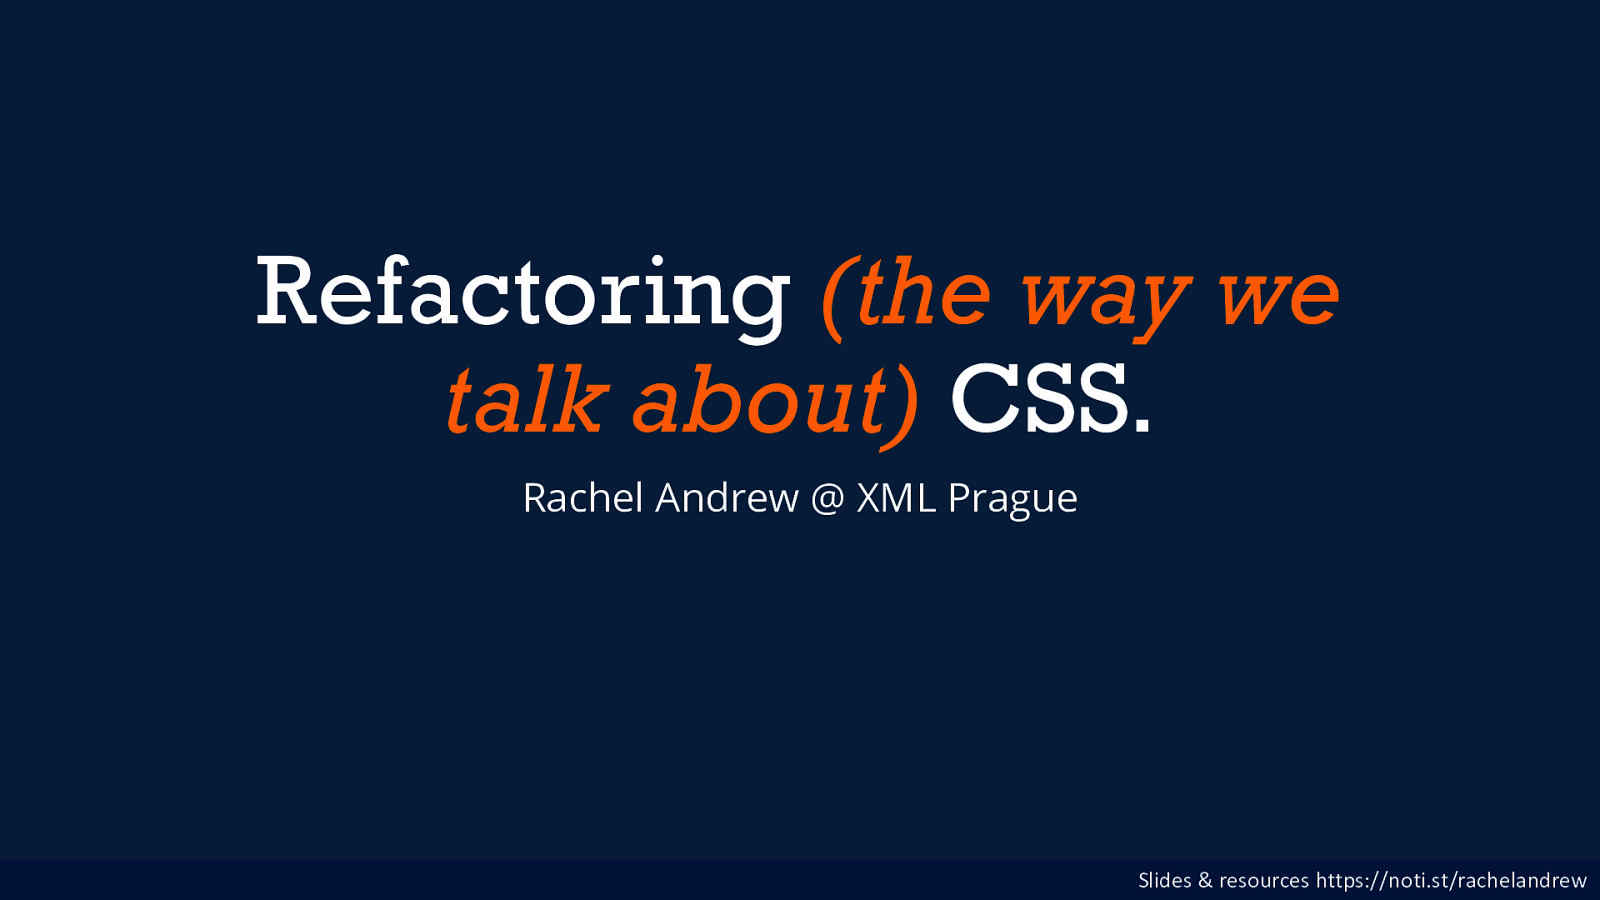 Refactoring (the way we talk about) CSS